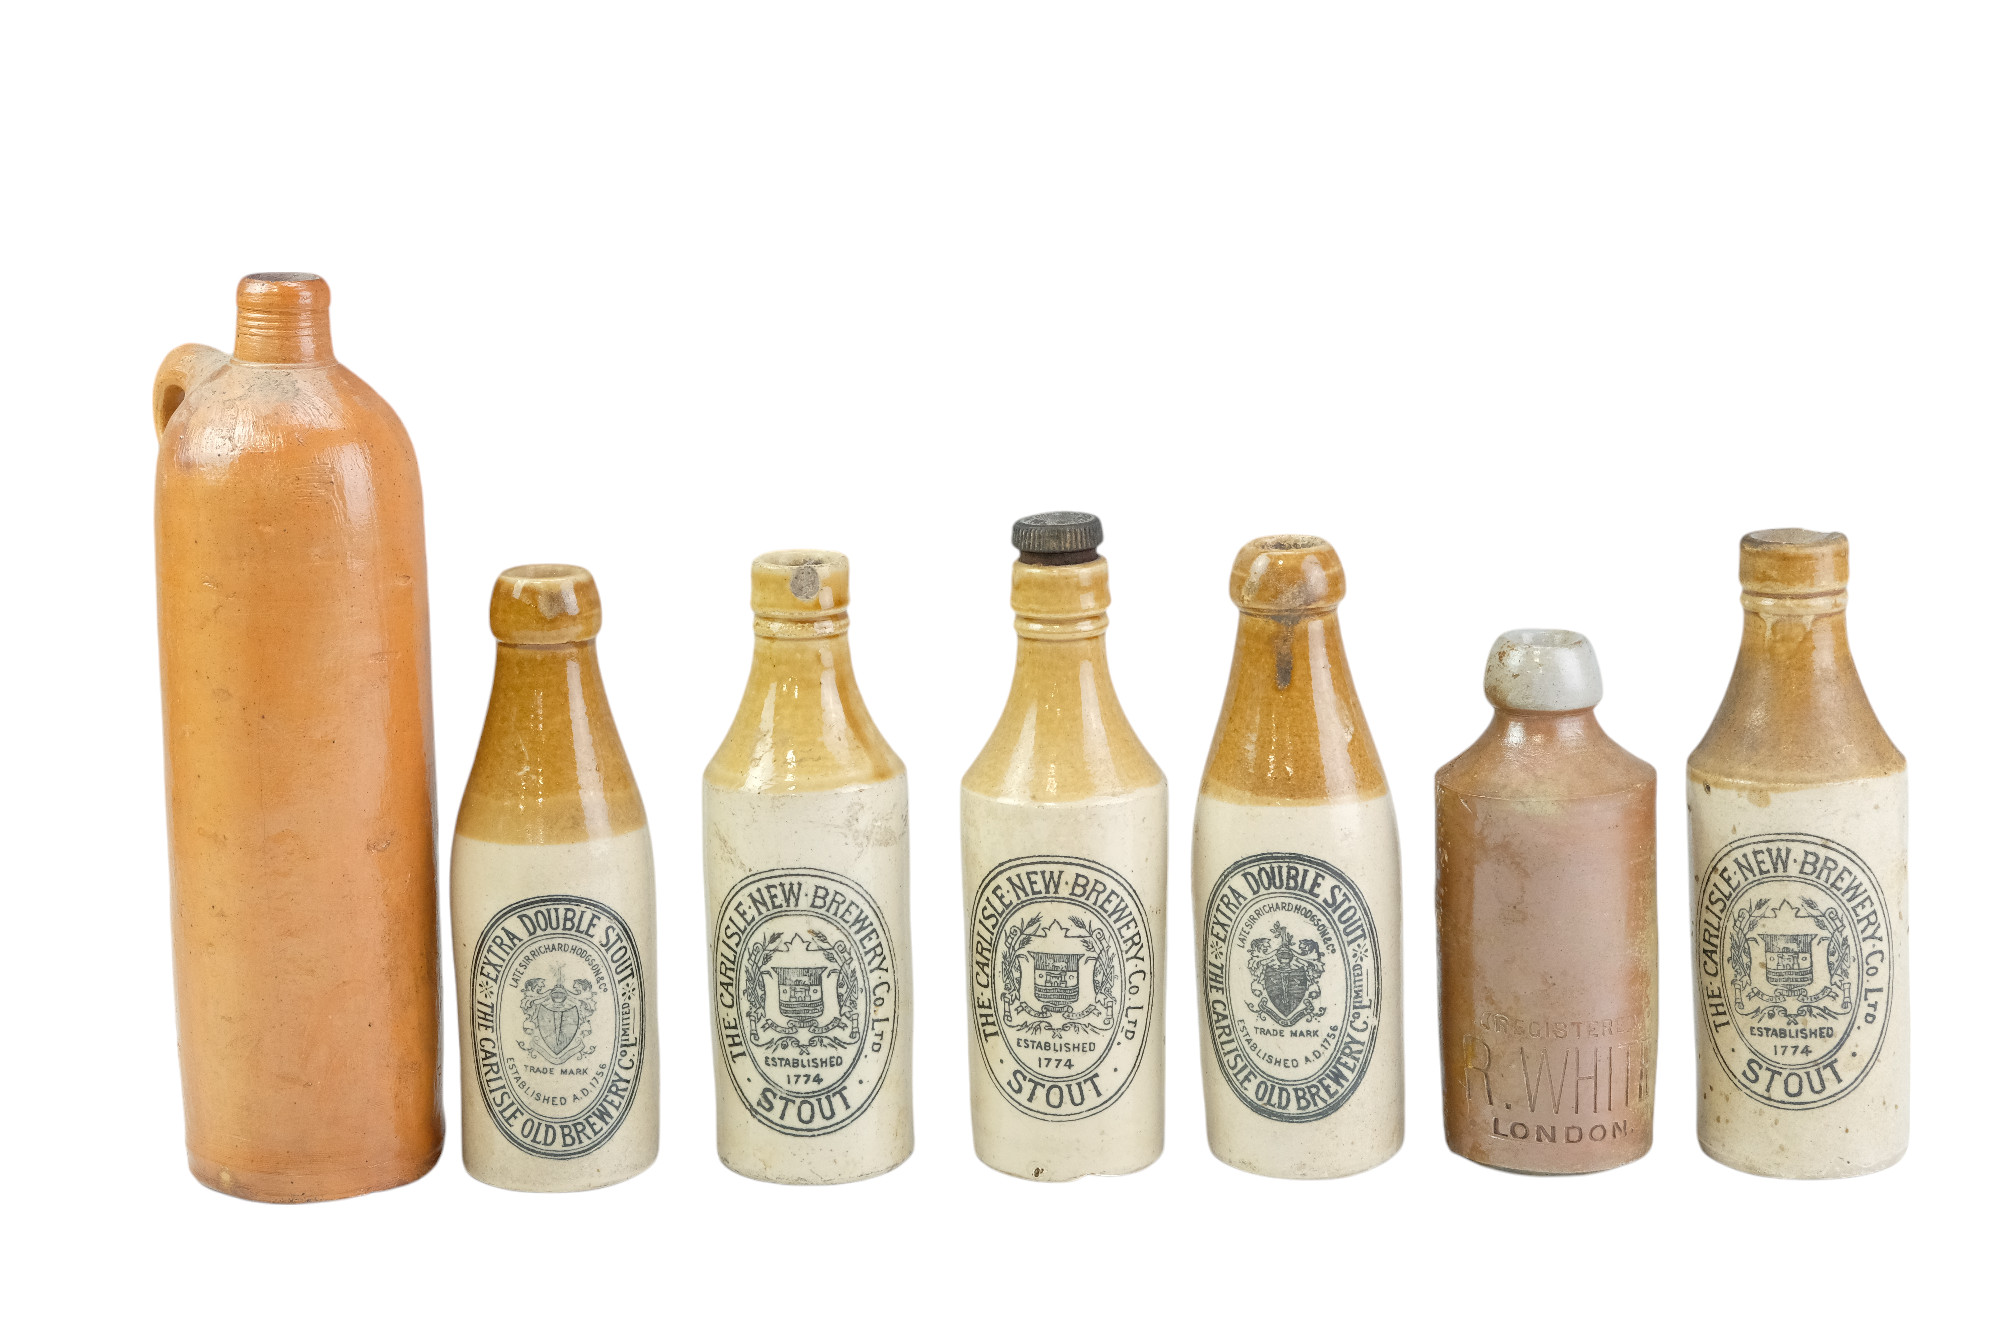 Carlisle stoneware ginger beer and other bottles and jars - Image 2 of 2